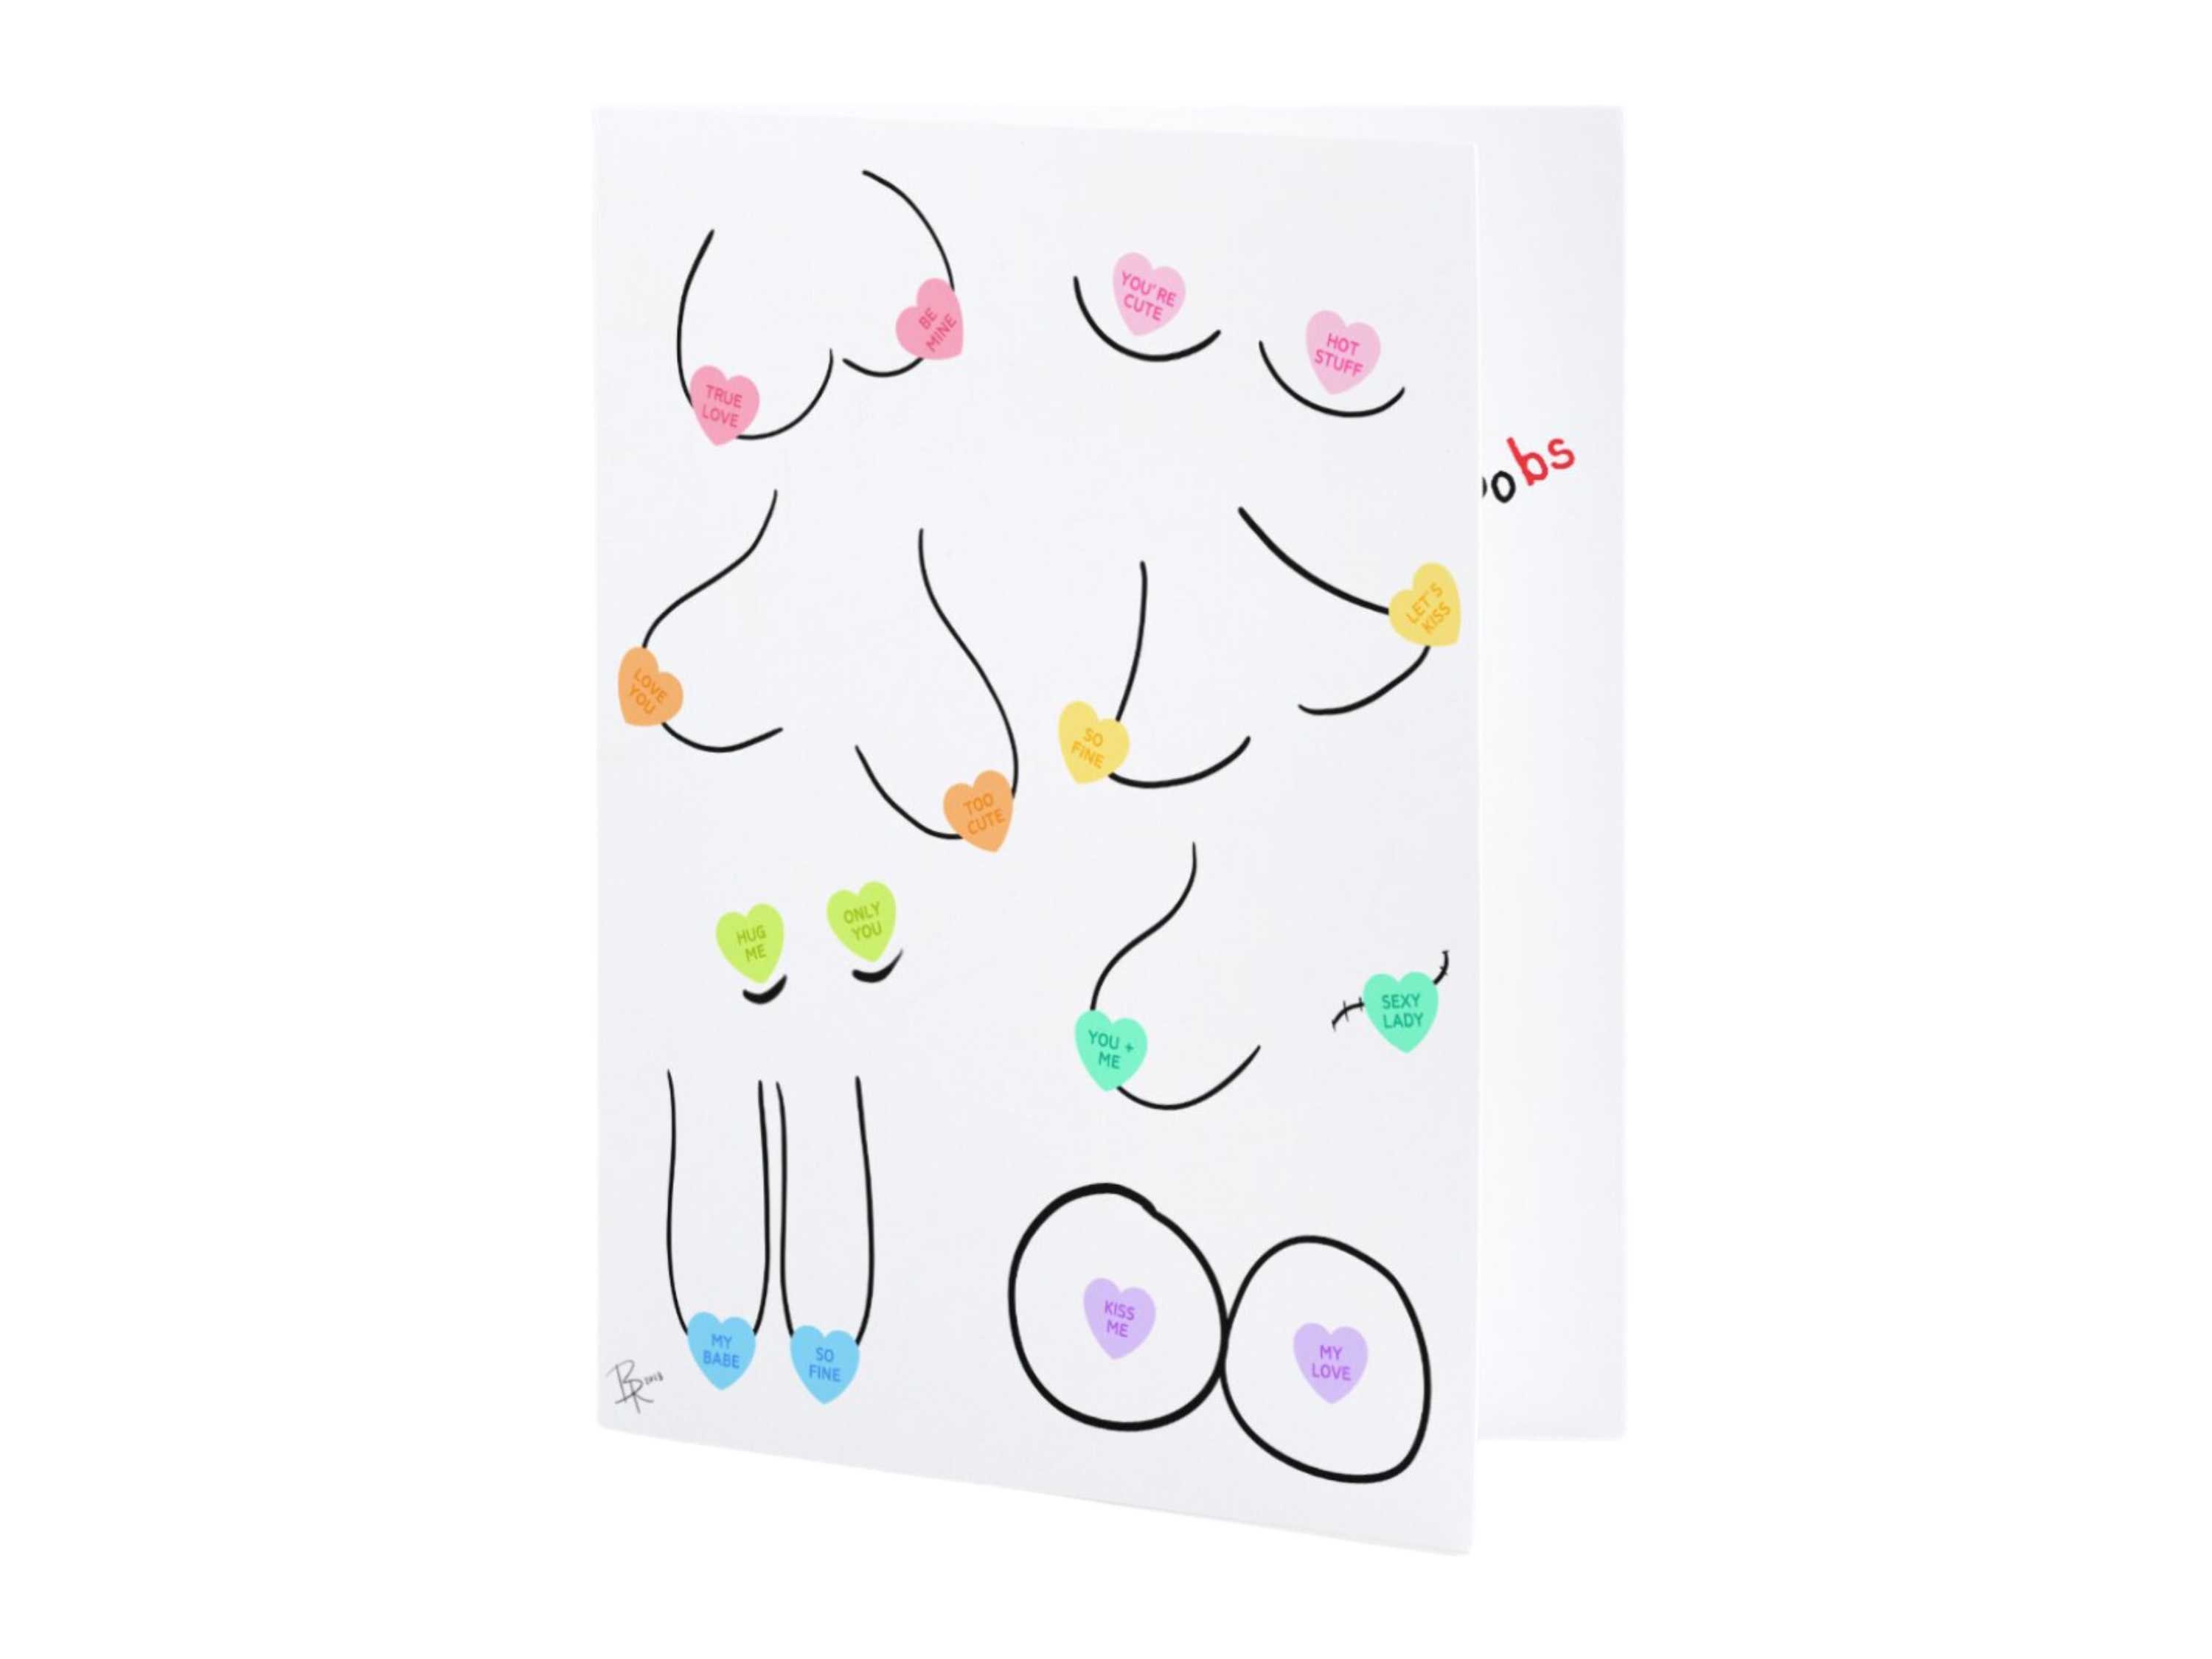 Funny Breast Cancer Card, Boobs Tried to Kill You, Support, Mastectomy  Lumpectomy, Surgery, Chemo, Encouragement, Get Well, Strength Courage 